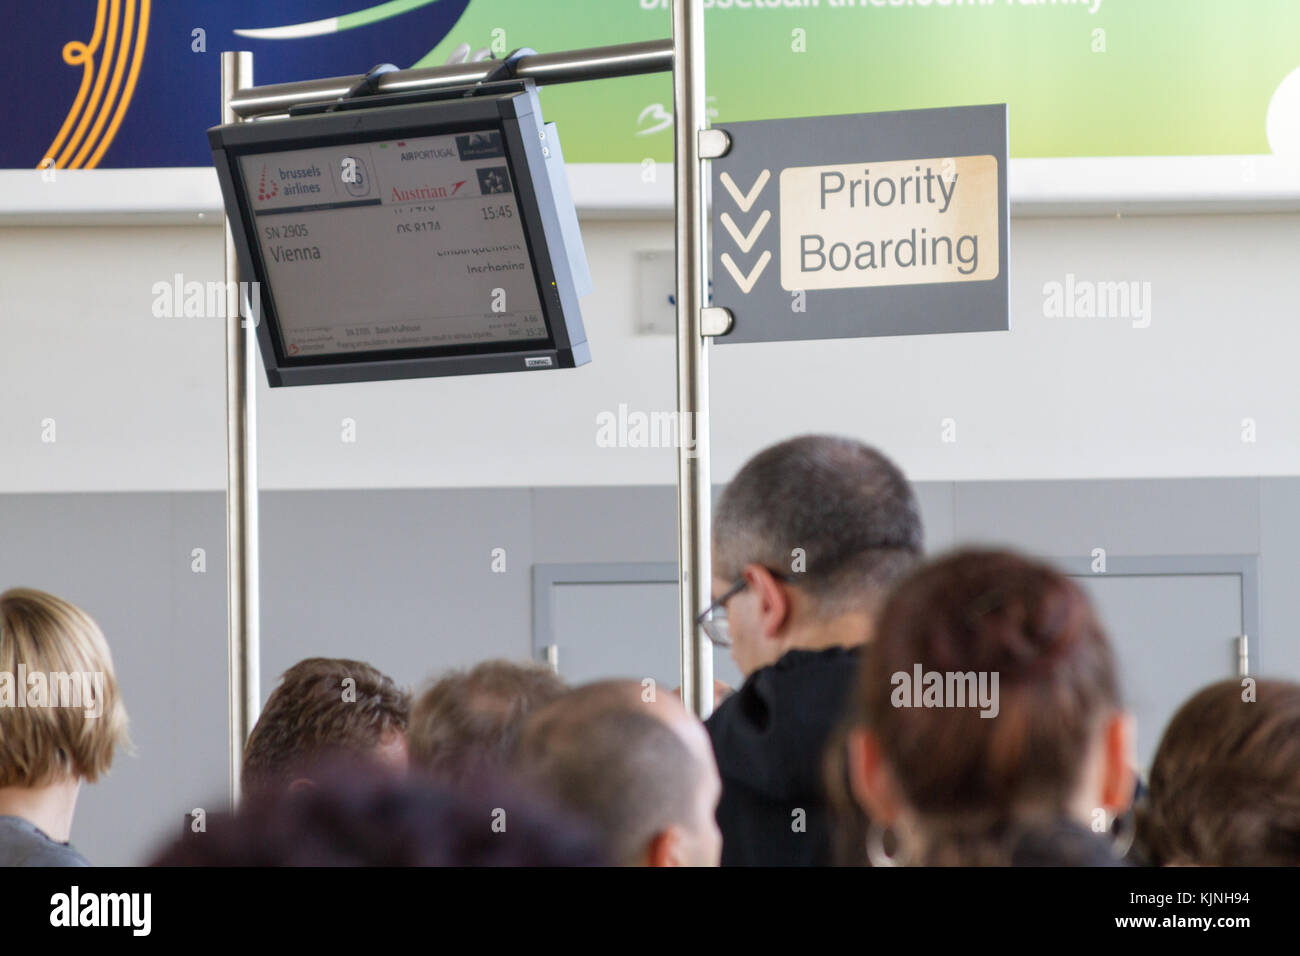 Brussels, Belgium. October 27 2017. Screen with a scheduled flight to Vienna and Priority Boarding sign at Zaventem Brussels Airport. Stock Photo